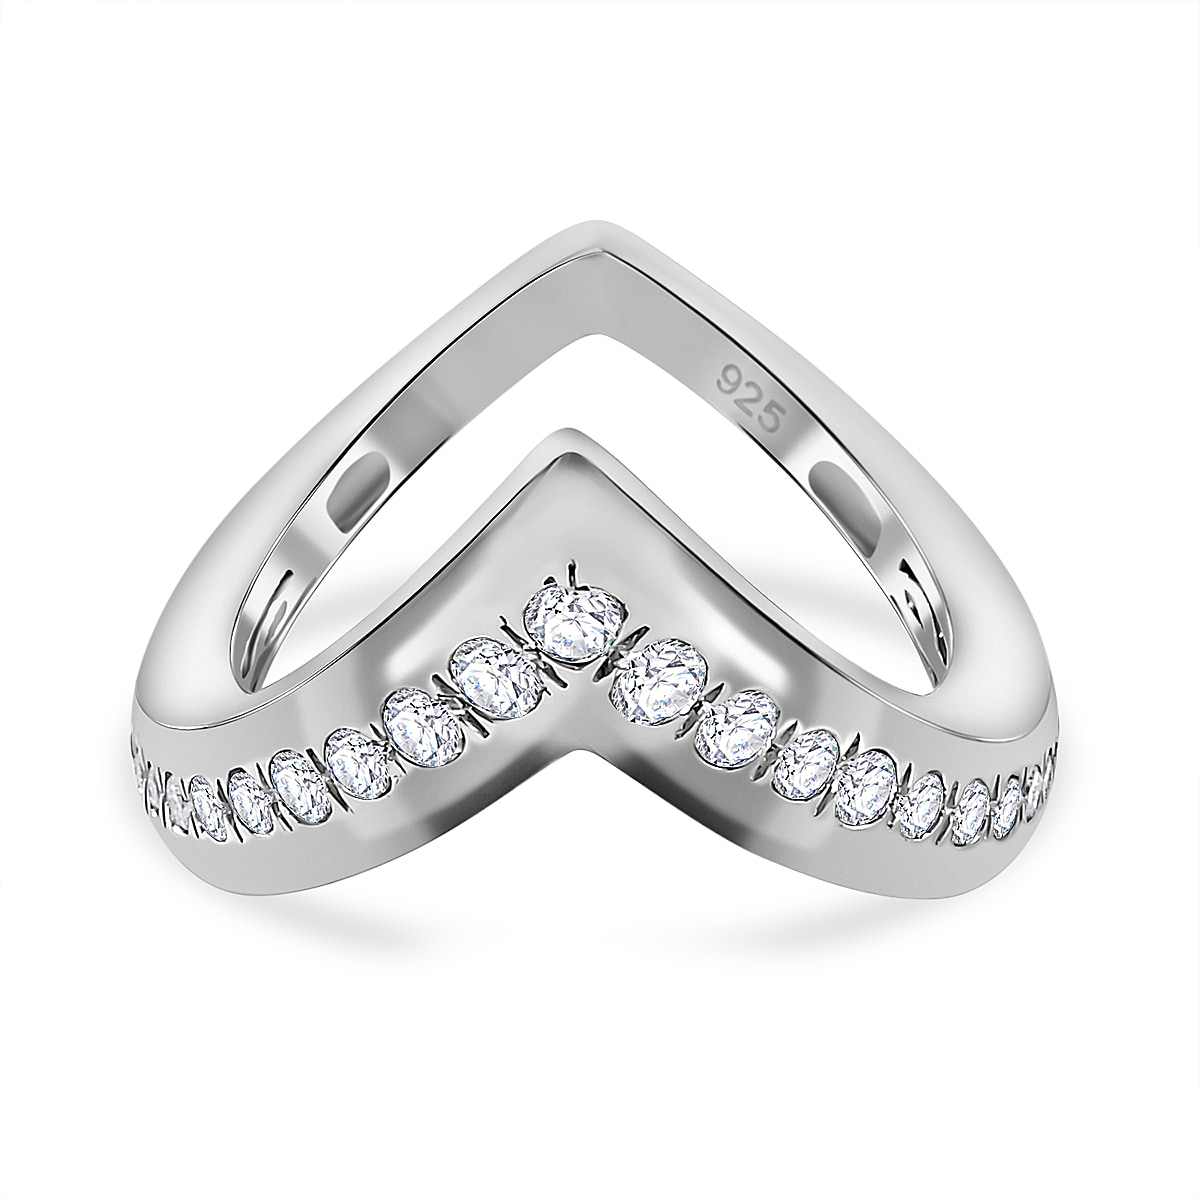 Moissanite Wishbone Ring in Platinum Overlay Sterling Silver 0.45 ct  0.538  Ct.